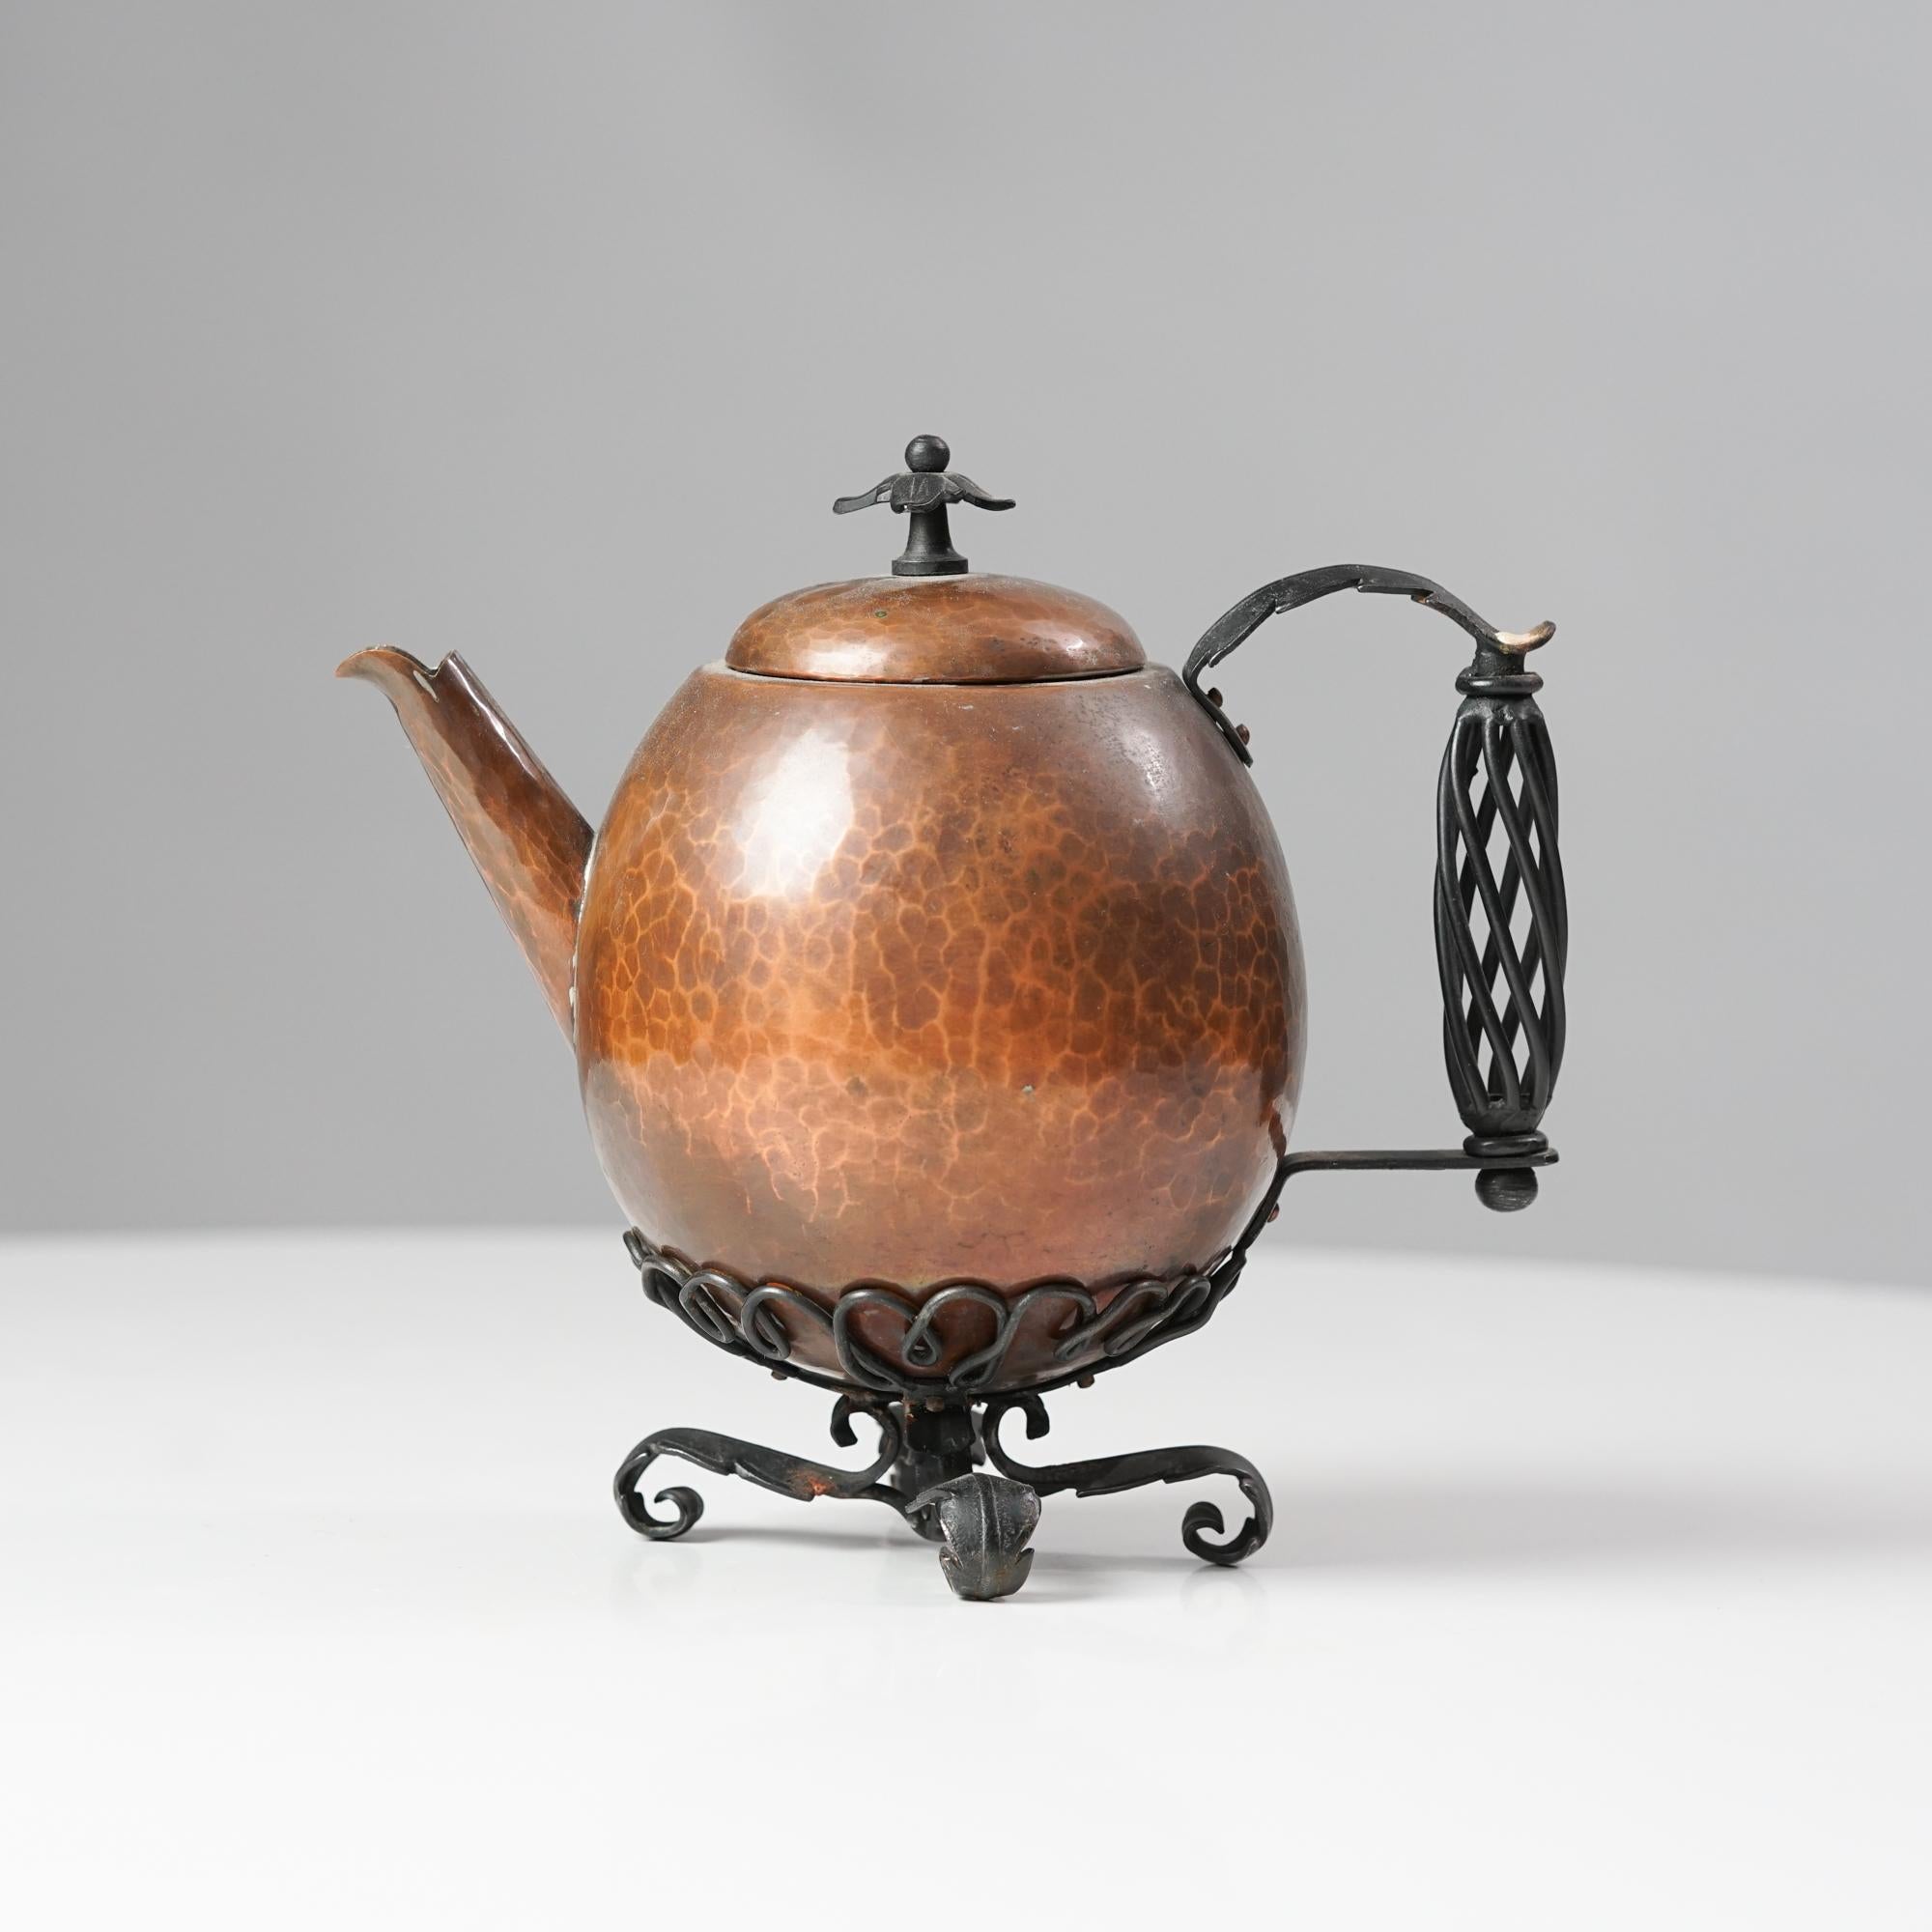 Copper teapot, manufactured by Taidetakomo Hakkarainen from the early 20th Century. Copper and forged iron. Good vintage condition, patina and minor wear consistent with age and use. 
